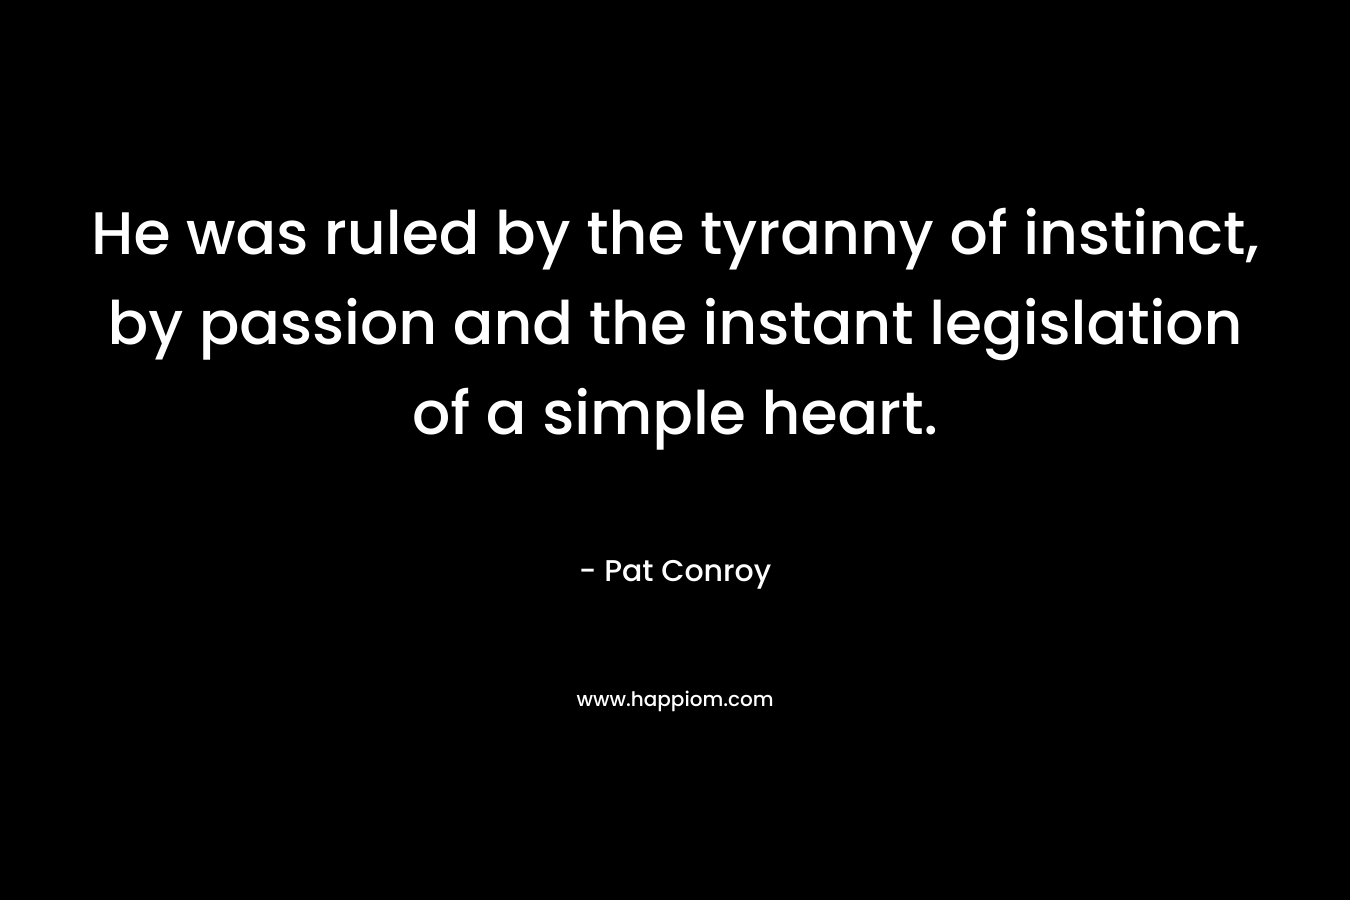 He was ruled by the tyranny of instinct, by passion and the instant legislation of a simple heart. – Pat Conroy